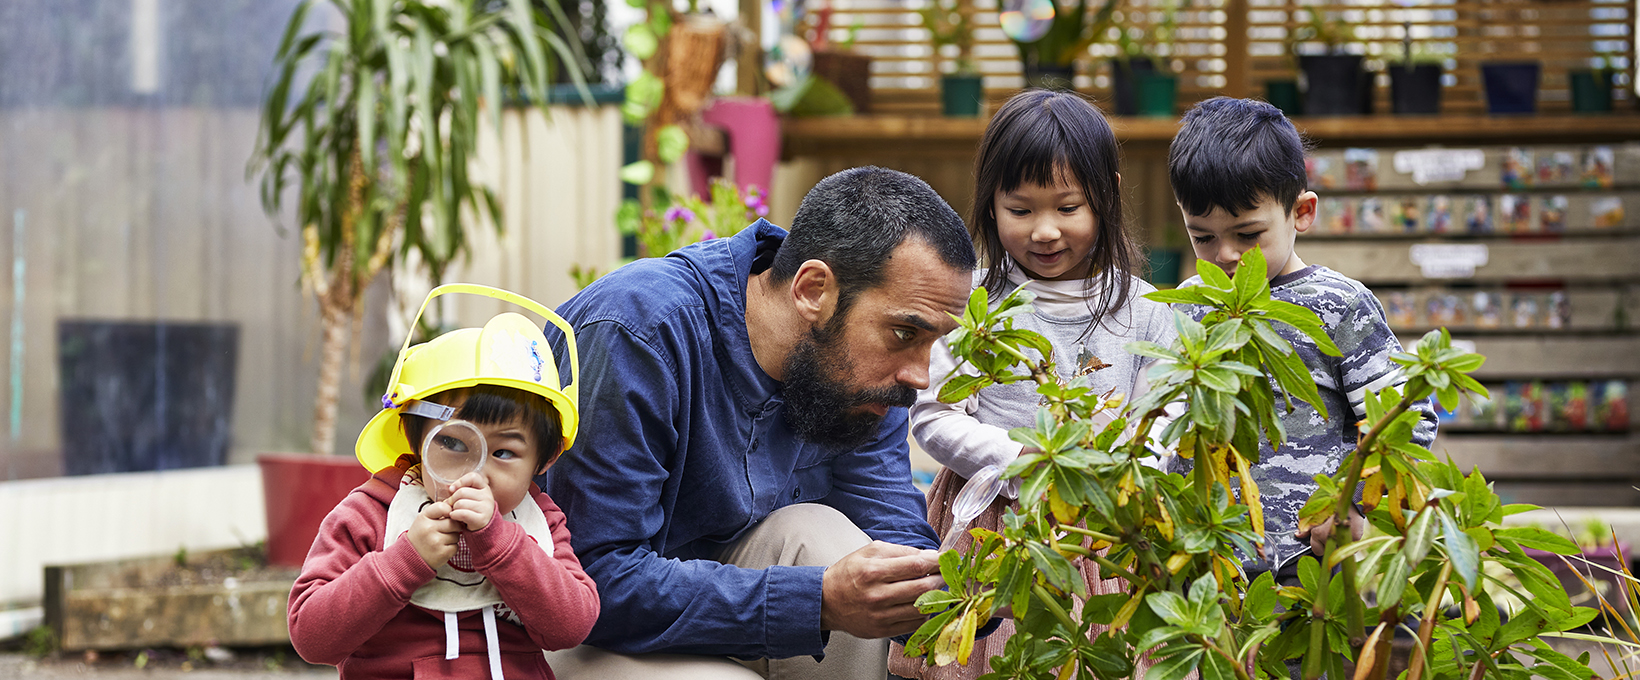 An early childhood centre teacher is inspecting a plant with three chidren (tamariki) in an outdoor environment 